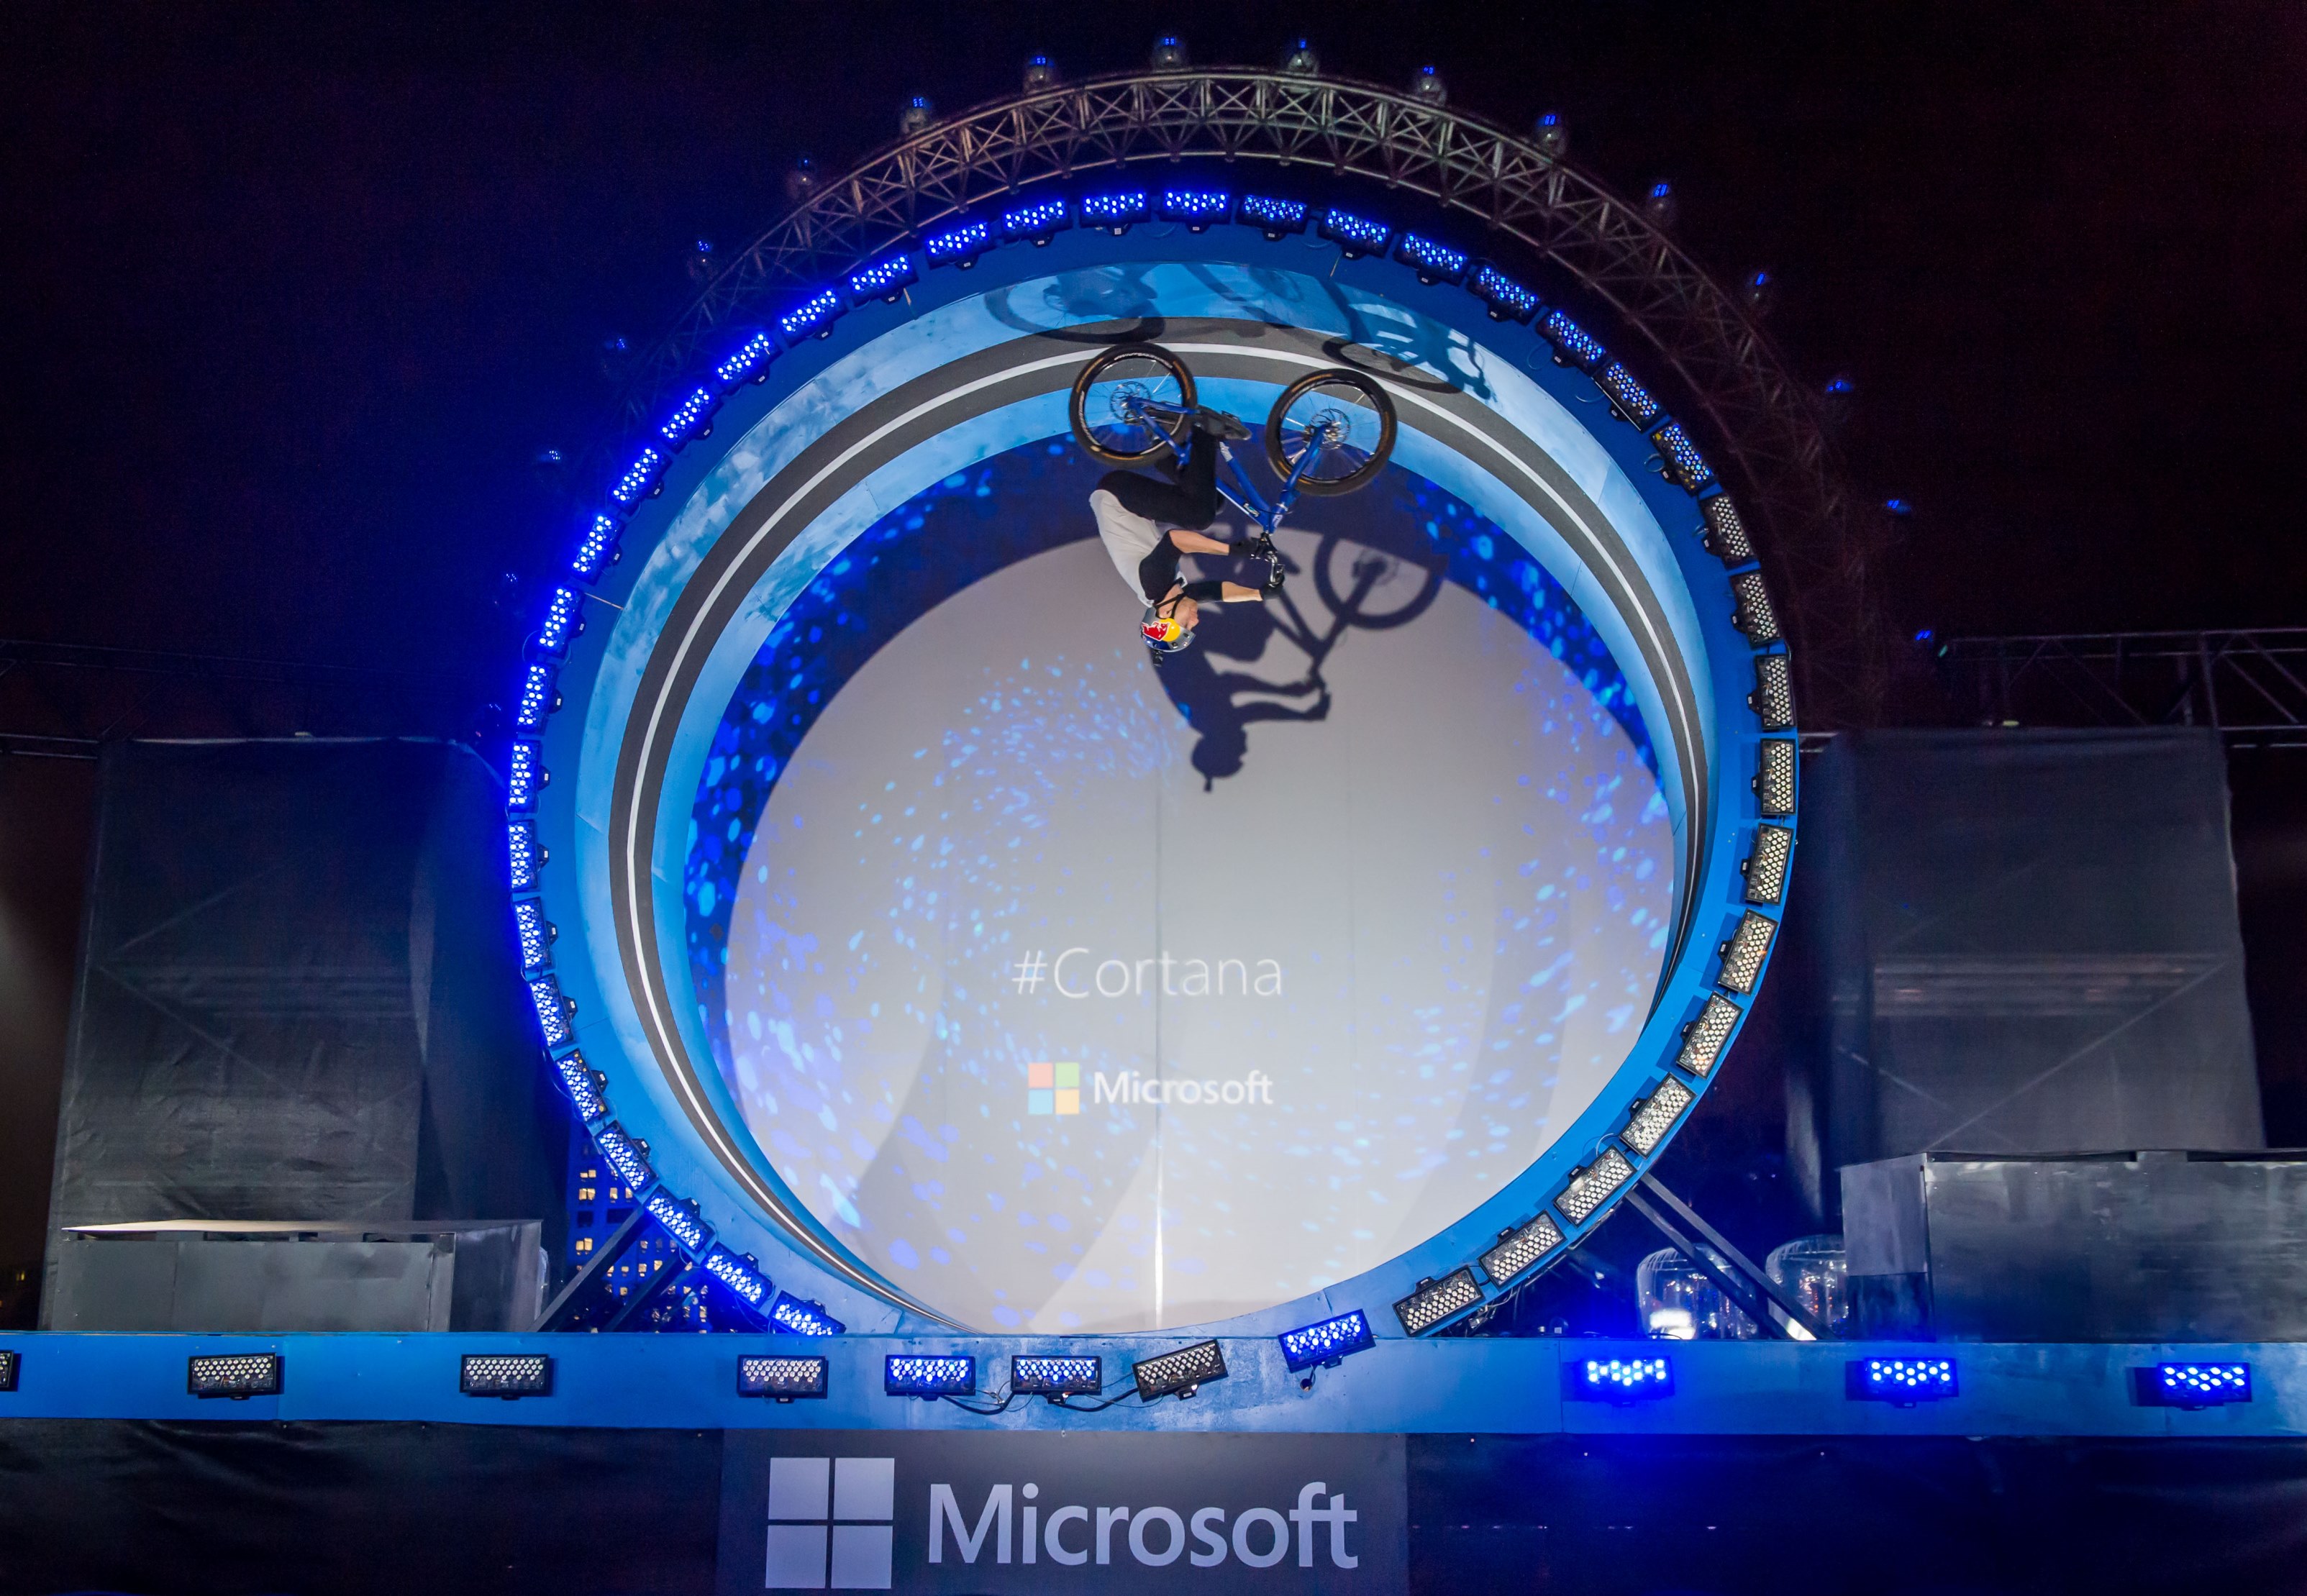 Photo by Ian Gavan/Getty Images for Microsoft. The Cortana themed event